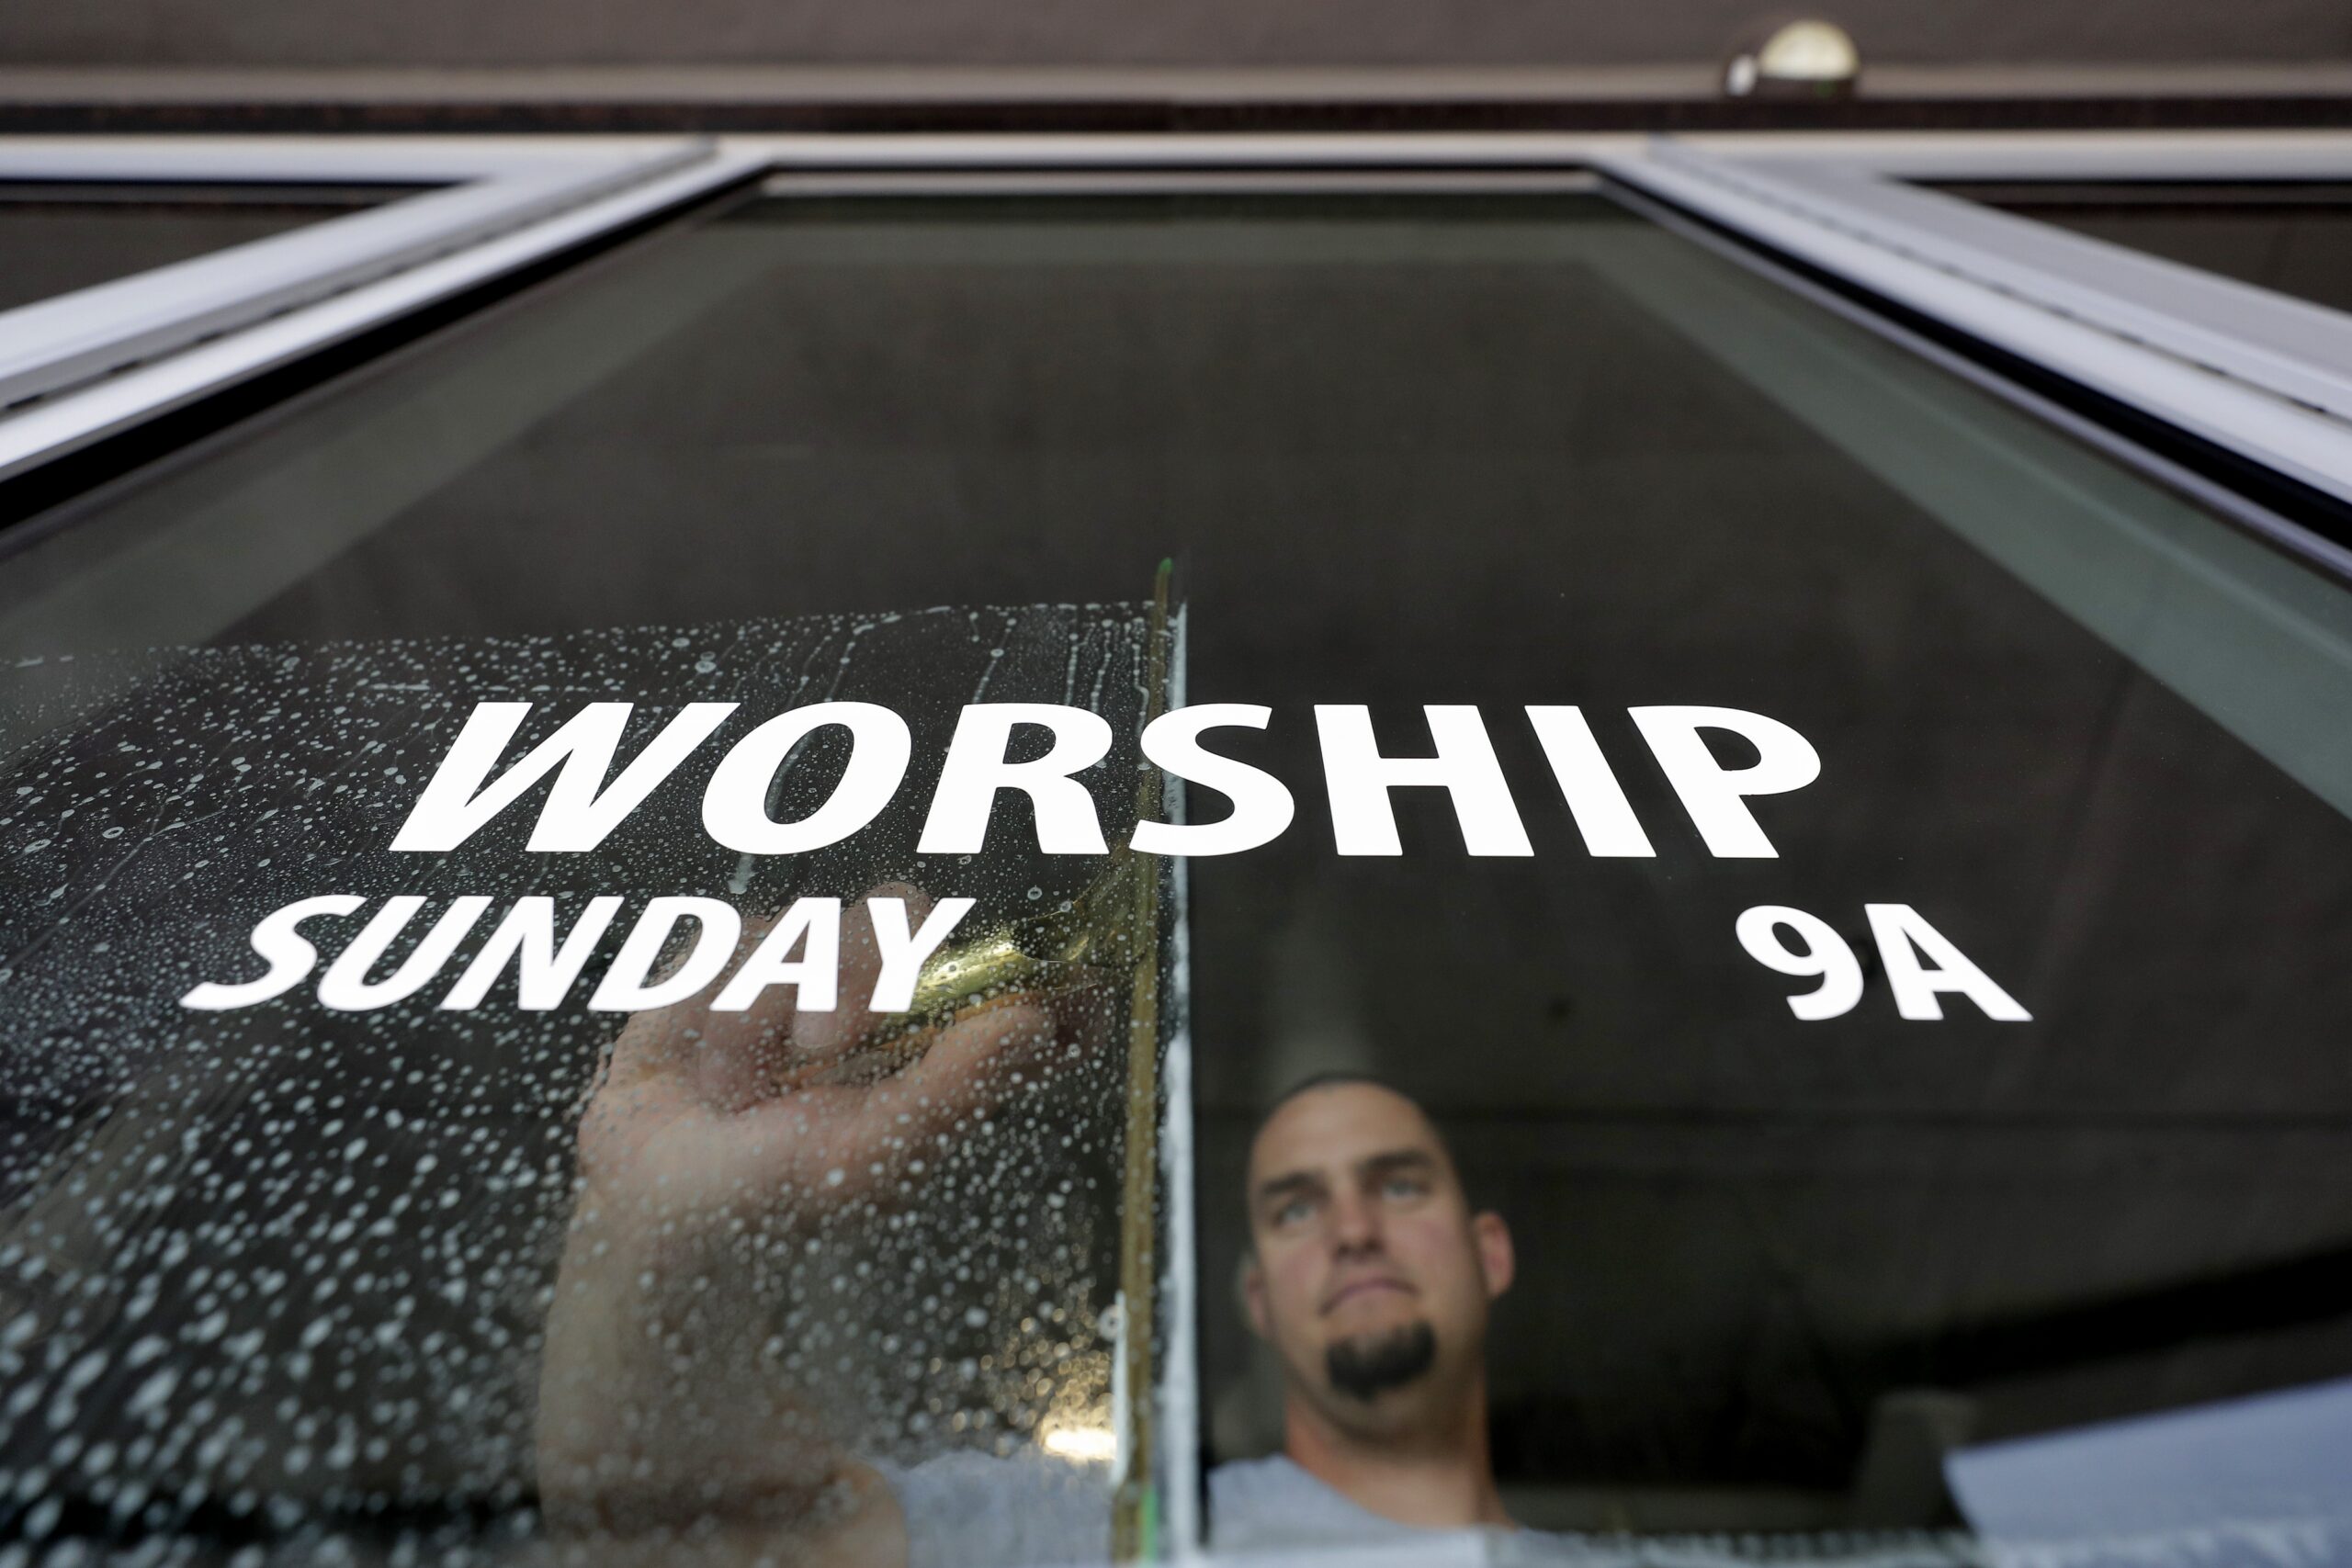 Houses of worship would be exempt from emergency orders under proposed constitutional amendment